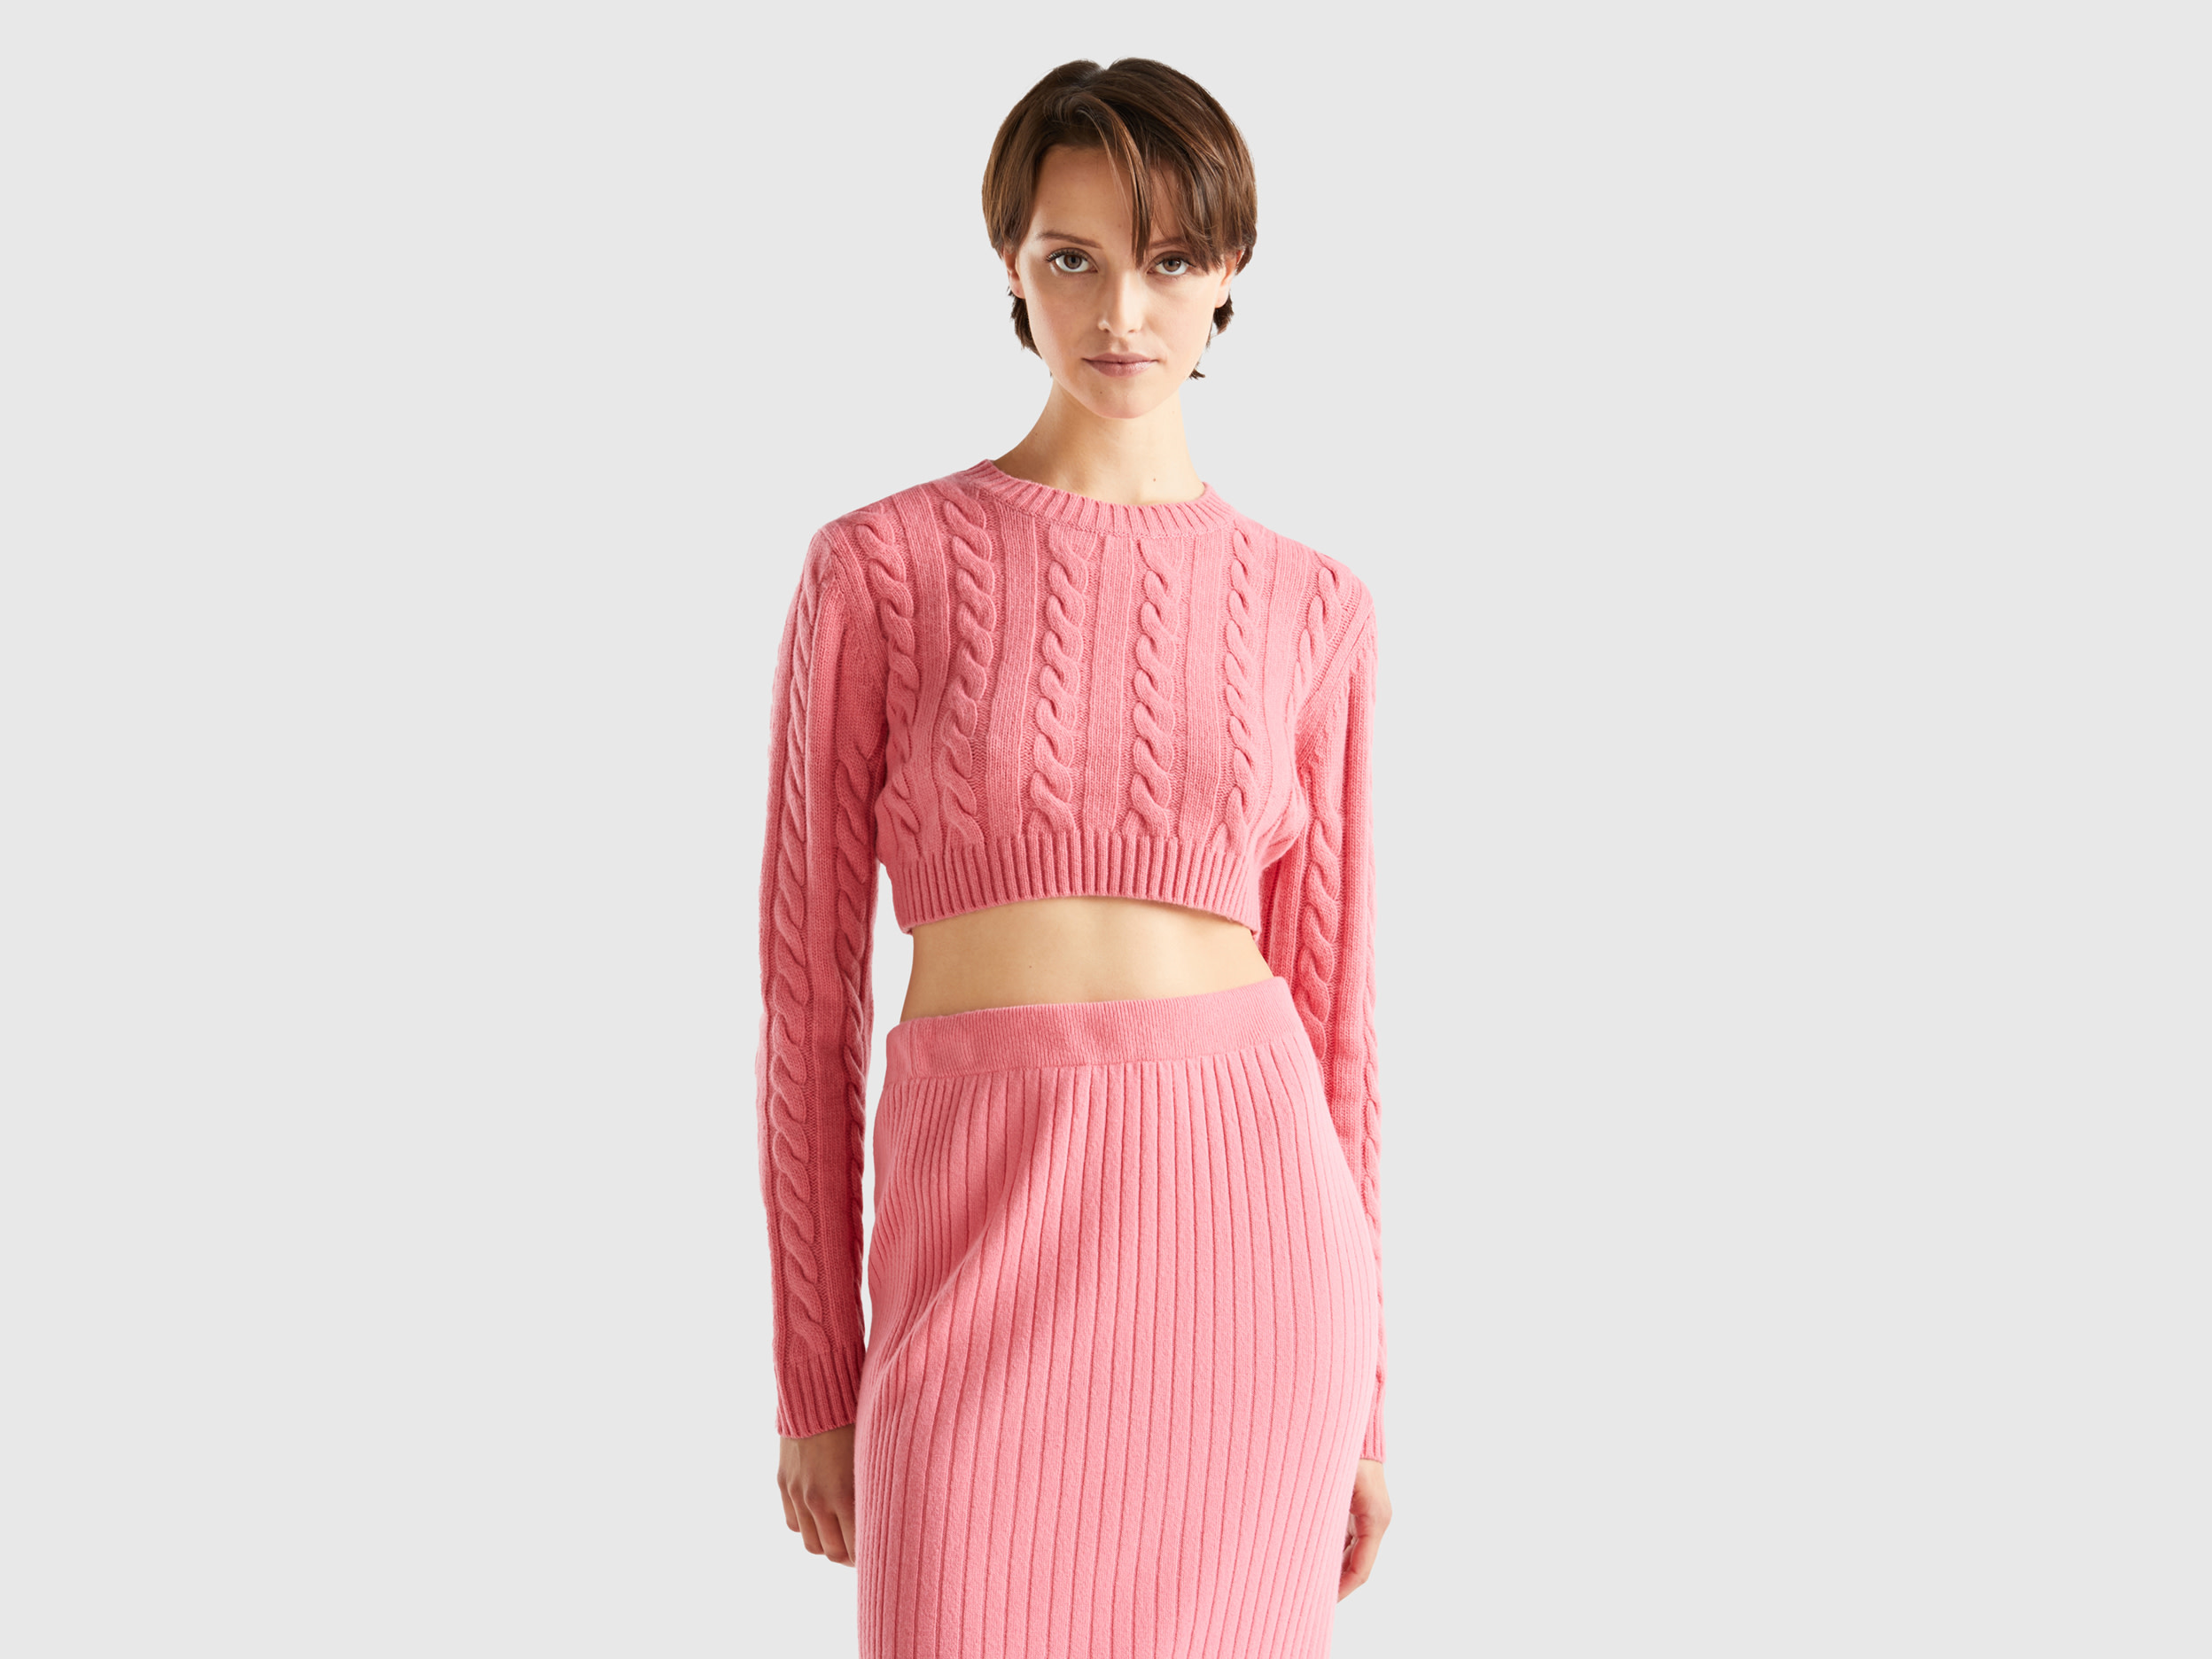 Benetton, Cropped Sweater With Cables, size XL, Pink, Women